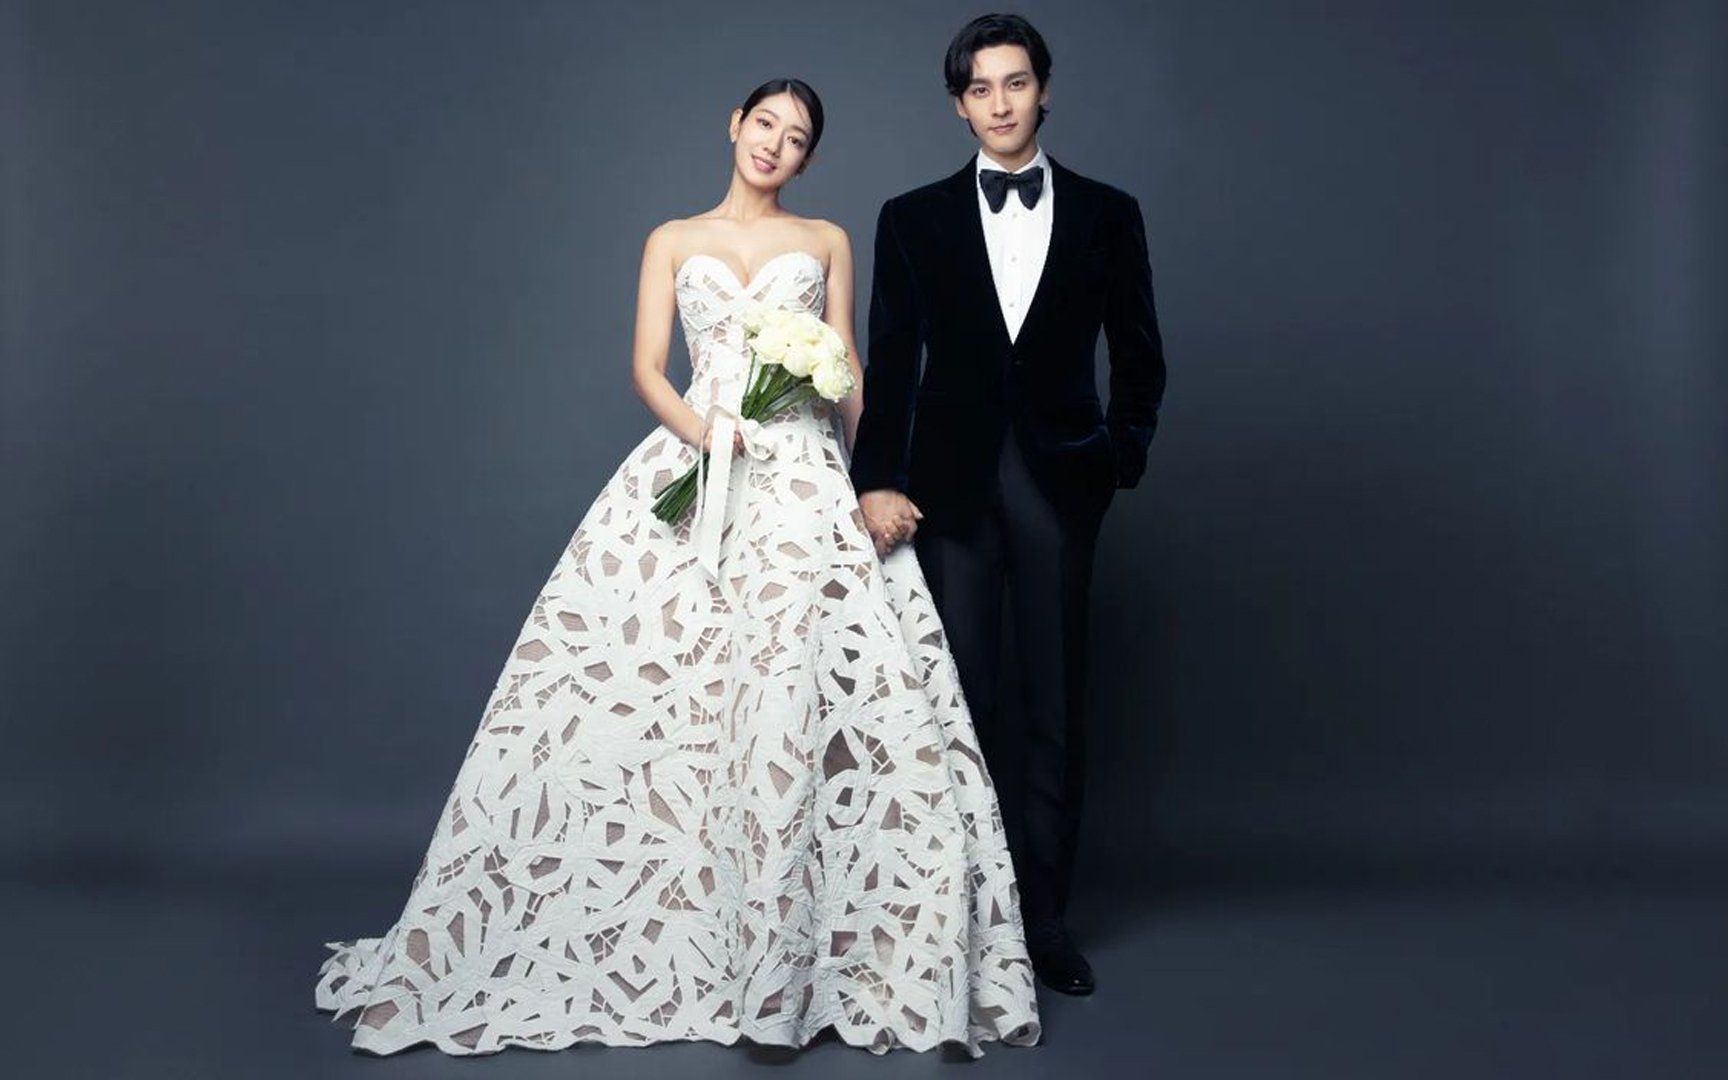 Extra stunning Park Shin Hye and Choi Tae Joon marriage ceremony images revealed